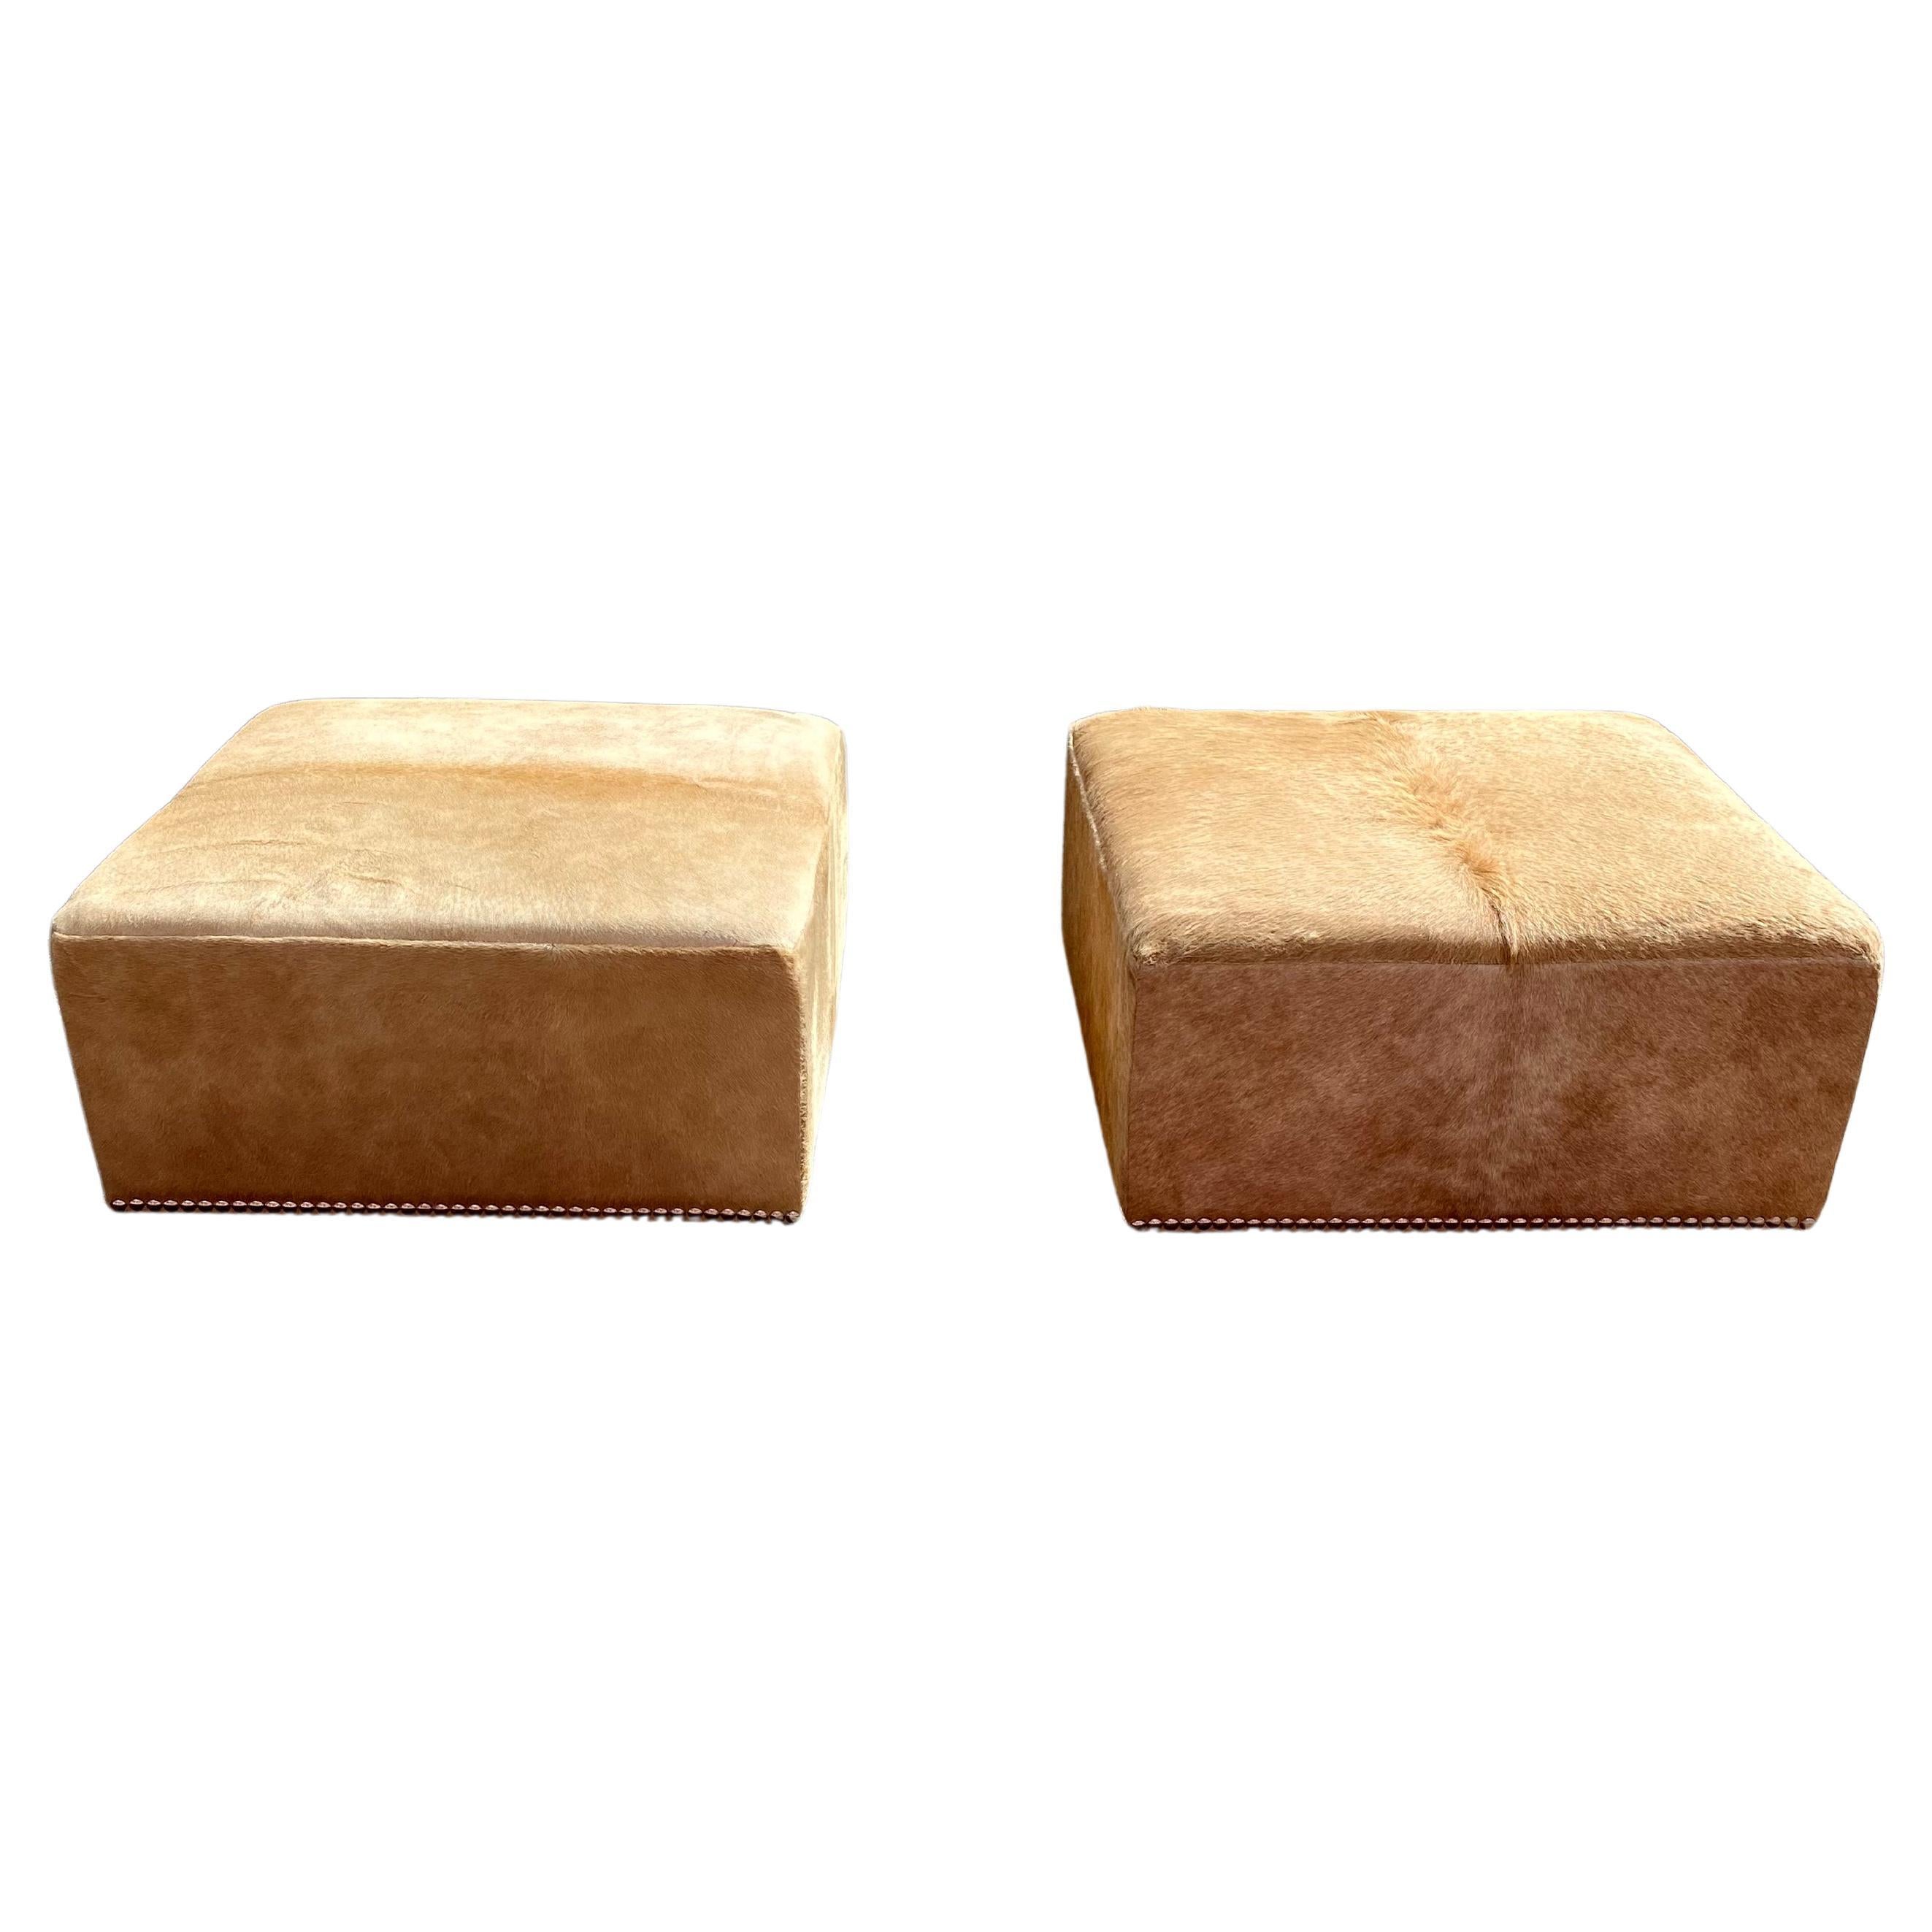 Large Cowhide and Nailhead Ottoman’s, Set of 2 For Sale